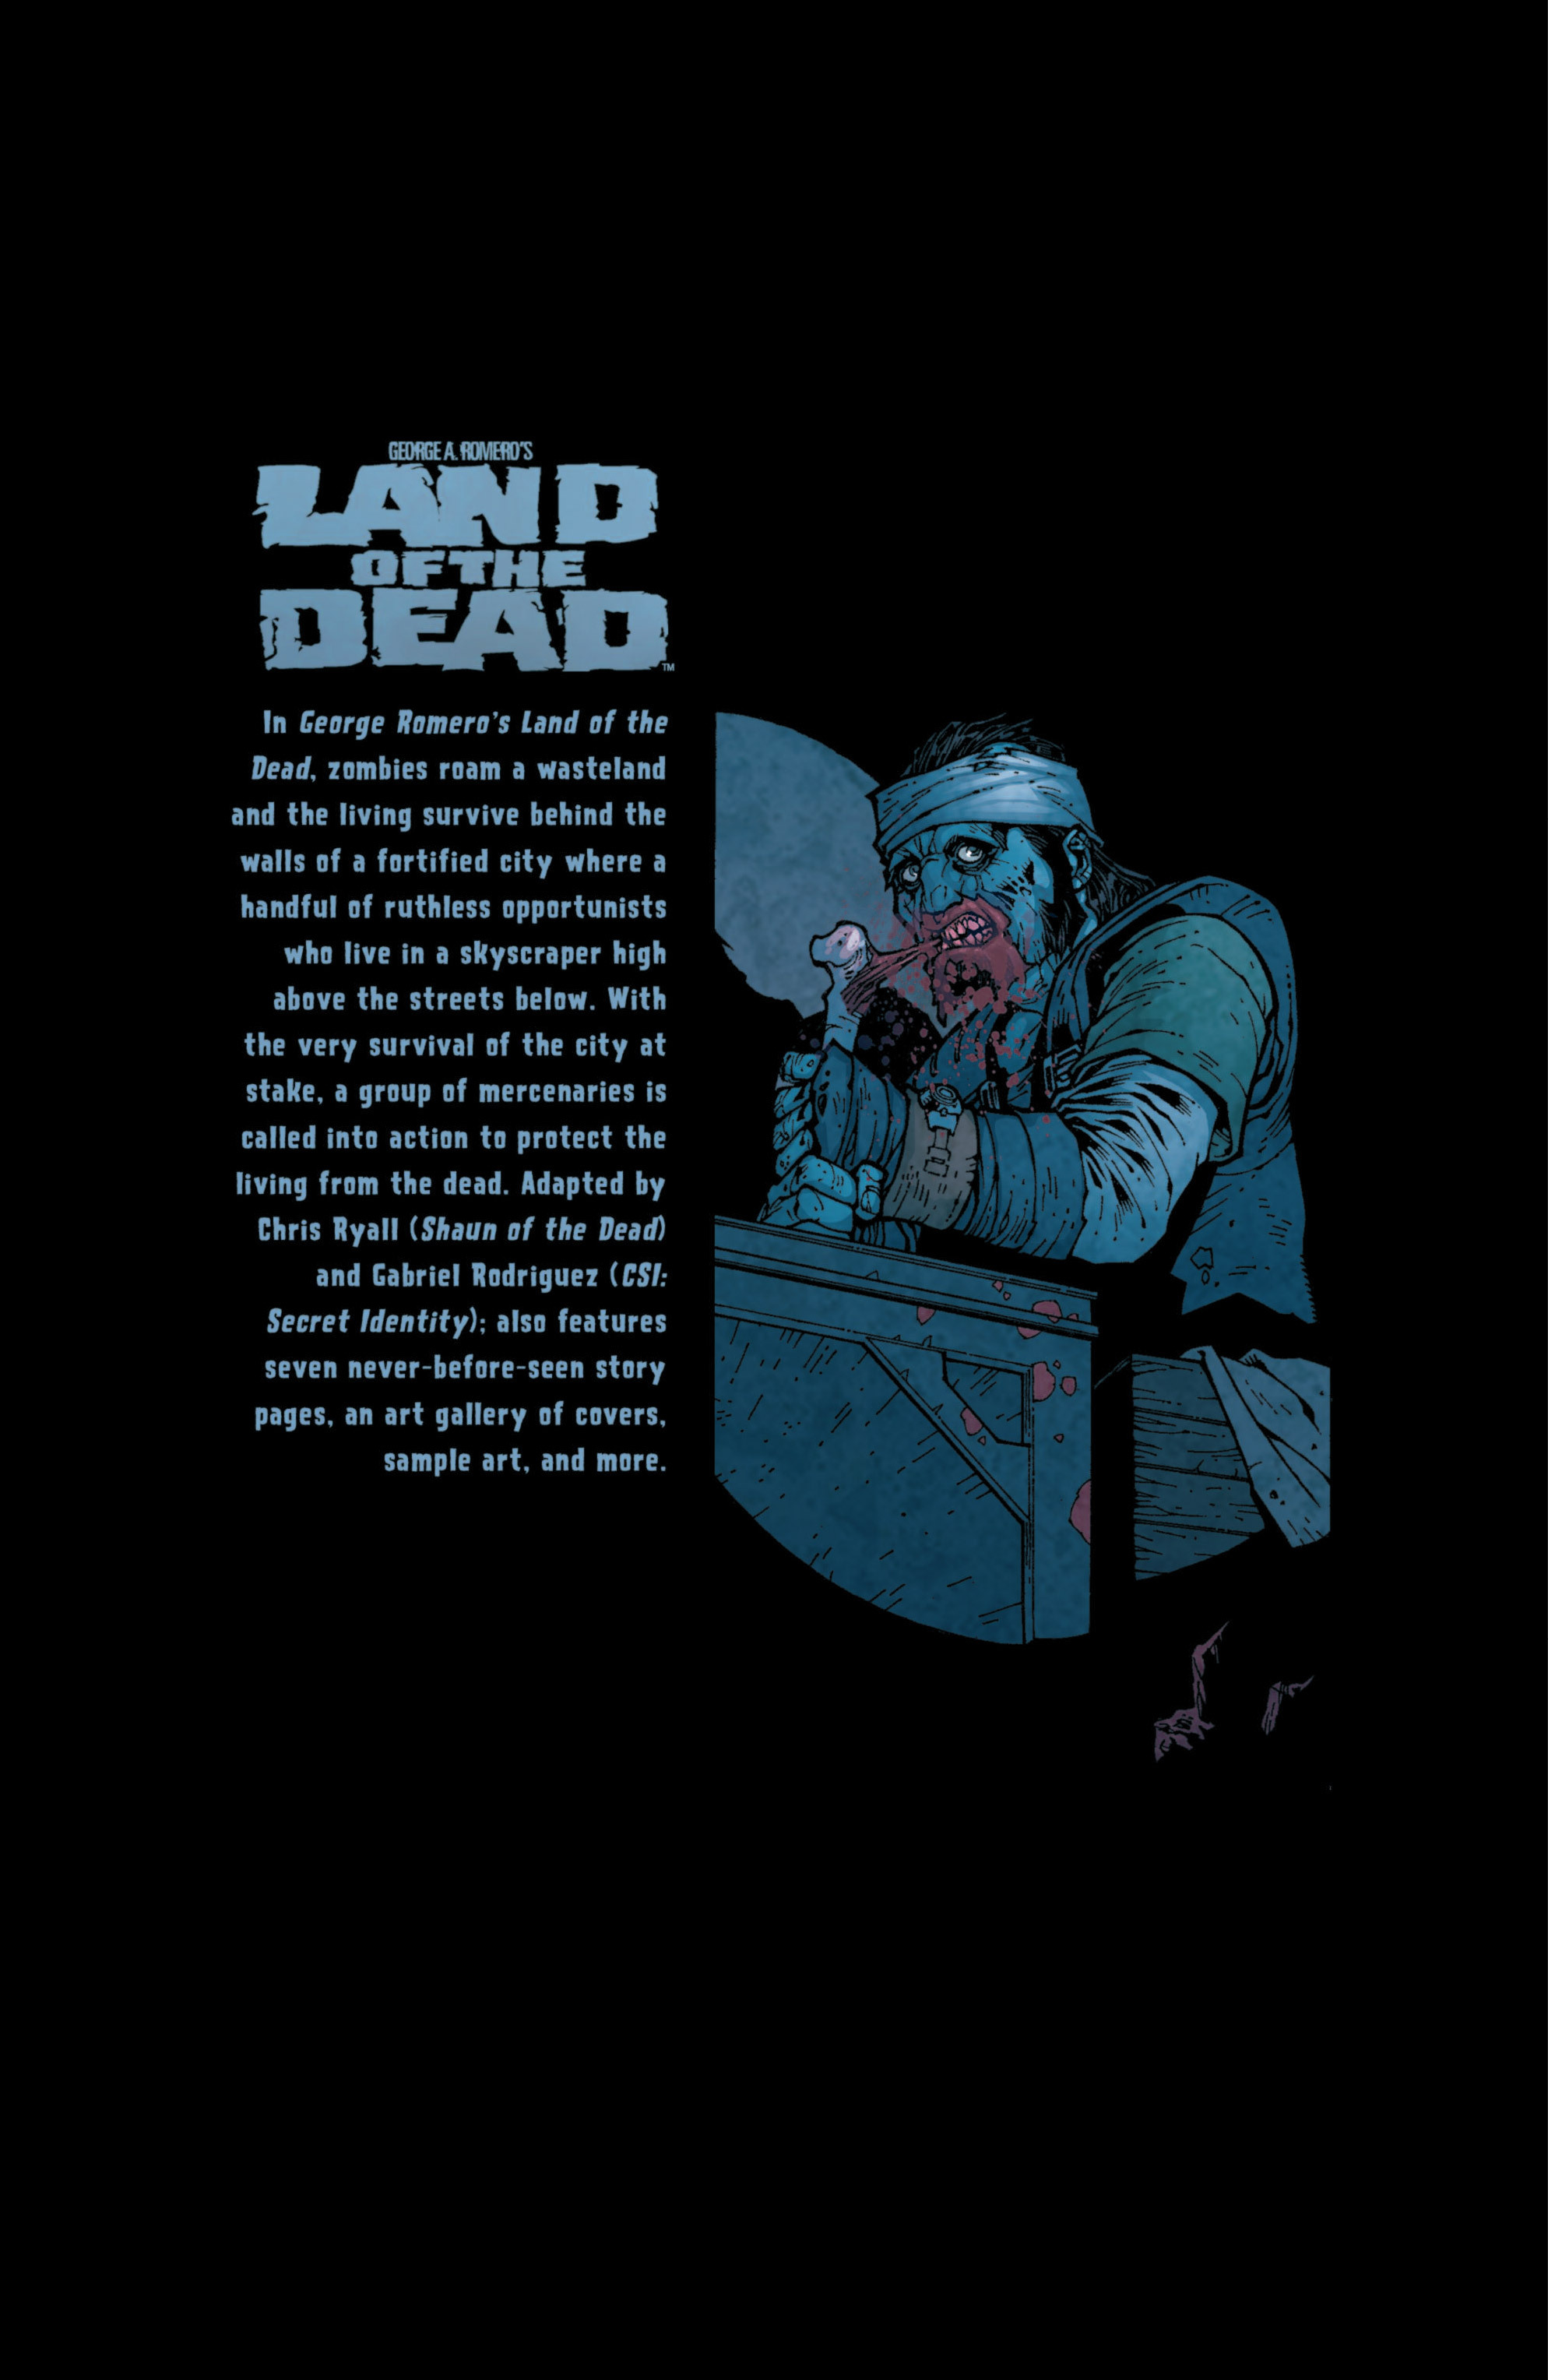 Read online Land of the Dead comic -  Issue # TPB - 129